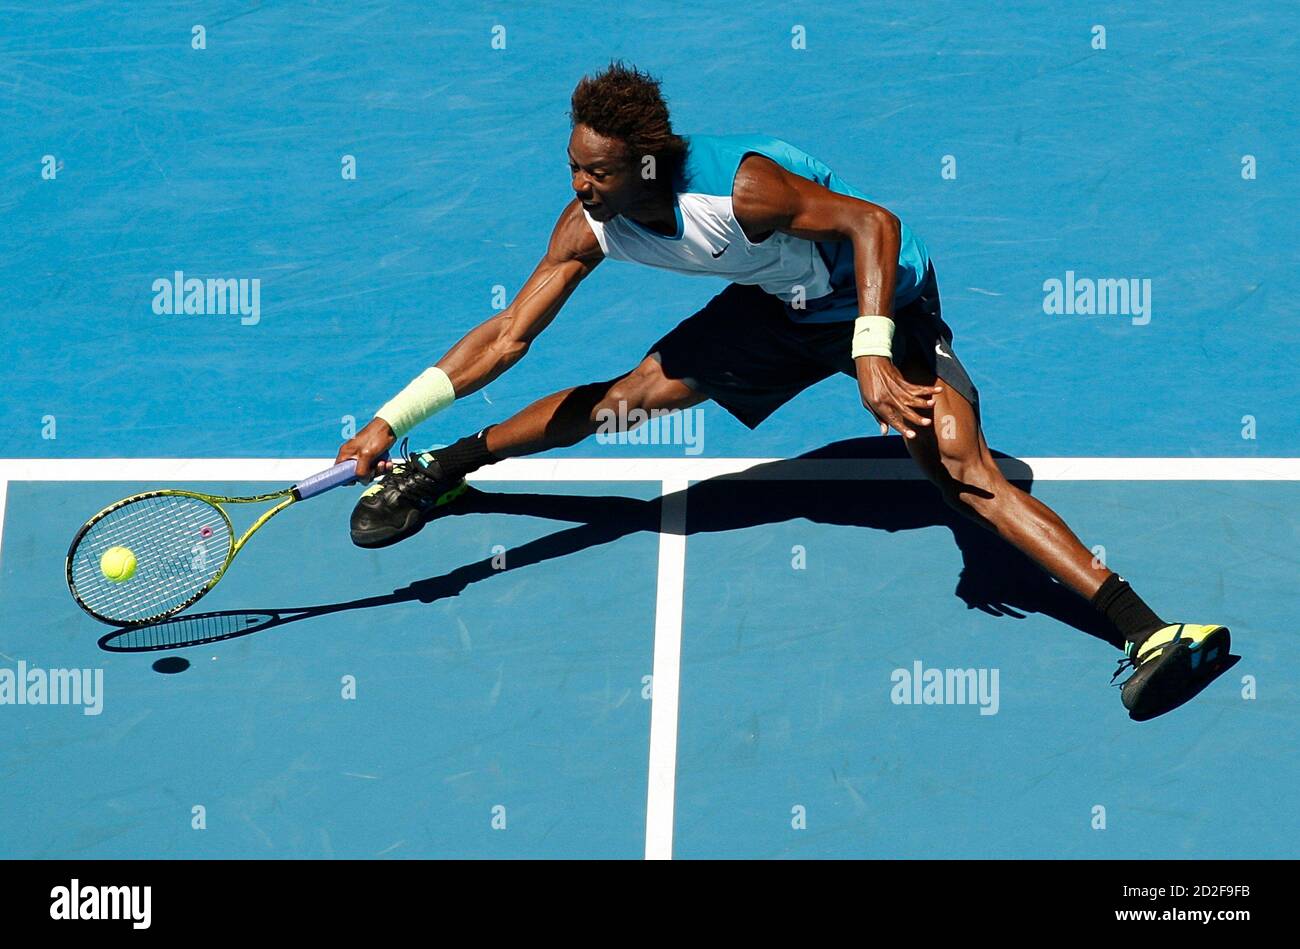 France's Gael Monfils returns to compatriot Gilles Simon during their match  at the Australian Open tennis tournament in Melbourne January 26, 2009.  REUTERS/Mick Tsikas (AUSTRALIA Stock Photo - Alamy